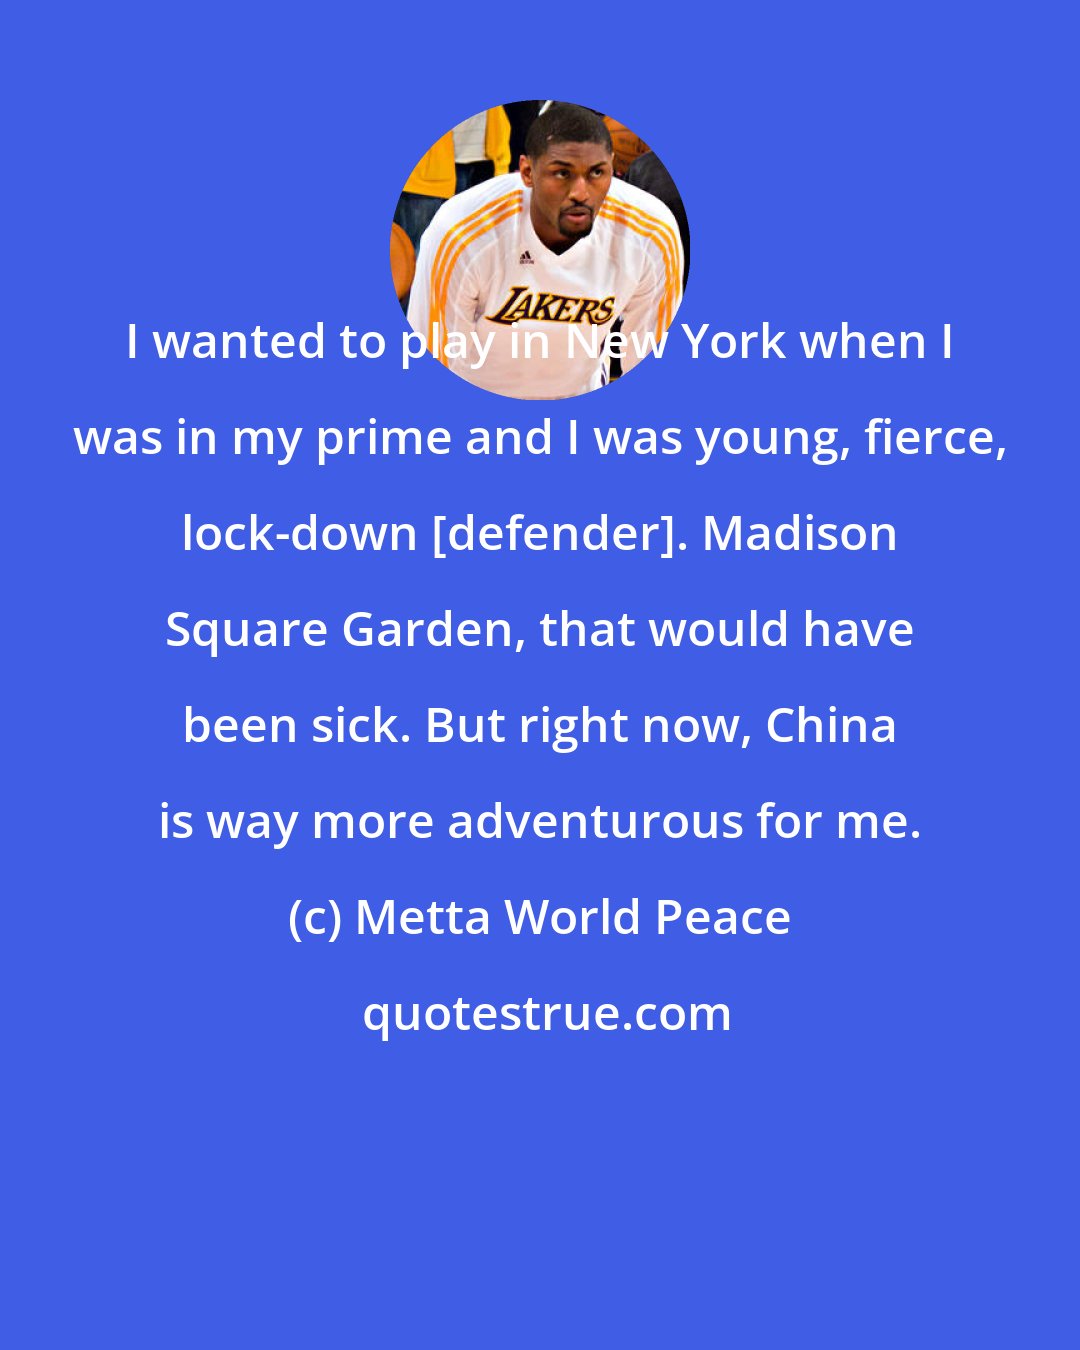 Metta World Peace: I wanted to play in New York when I was in my prime and I was young, fierce, lock-down [defender]. Madison Square Garden, that would have been sick. But right now, China is way more adventurous for me.